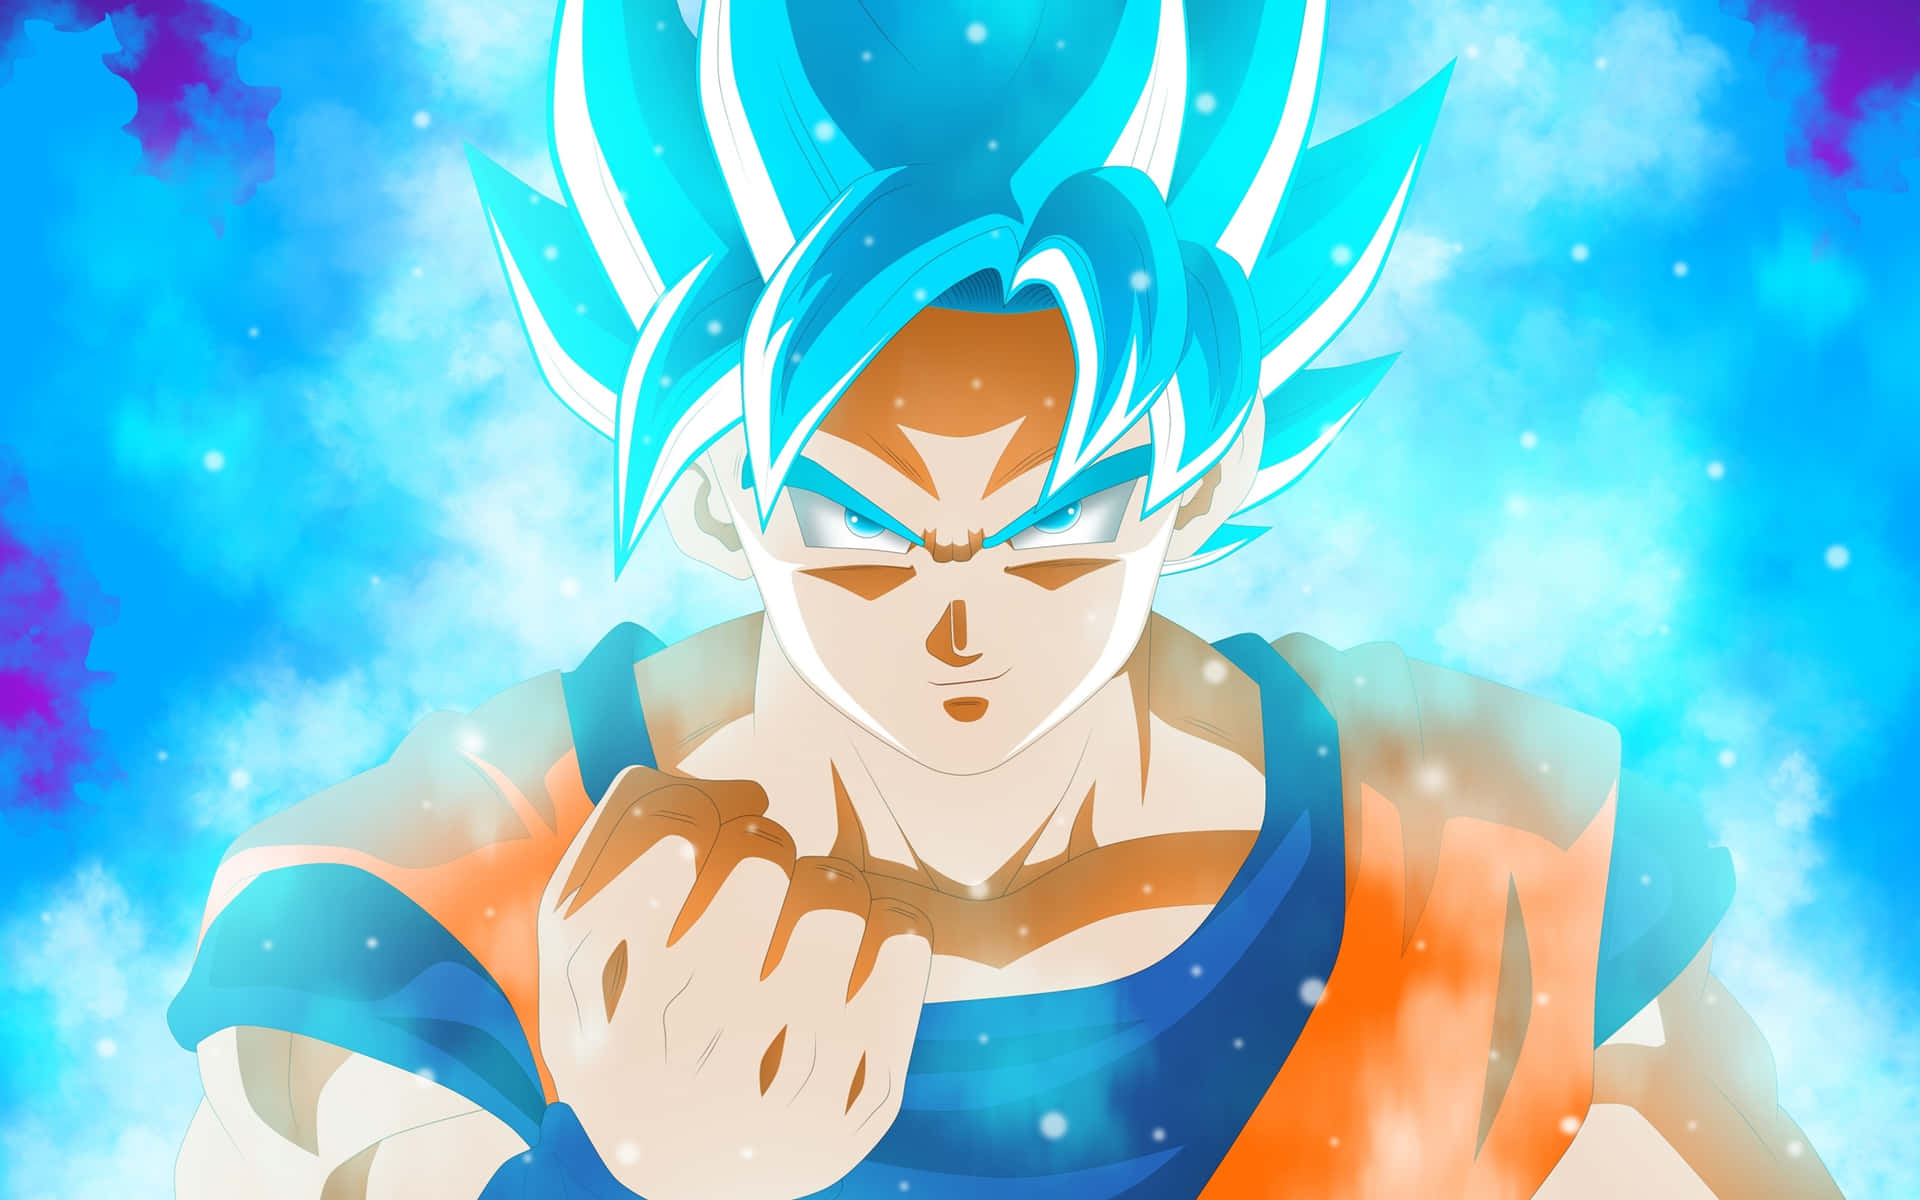 "Embrace Your Inner Power with Goku!"